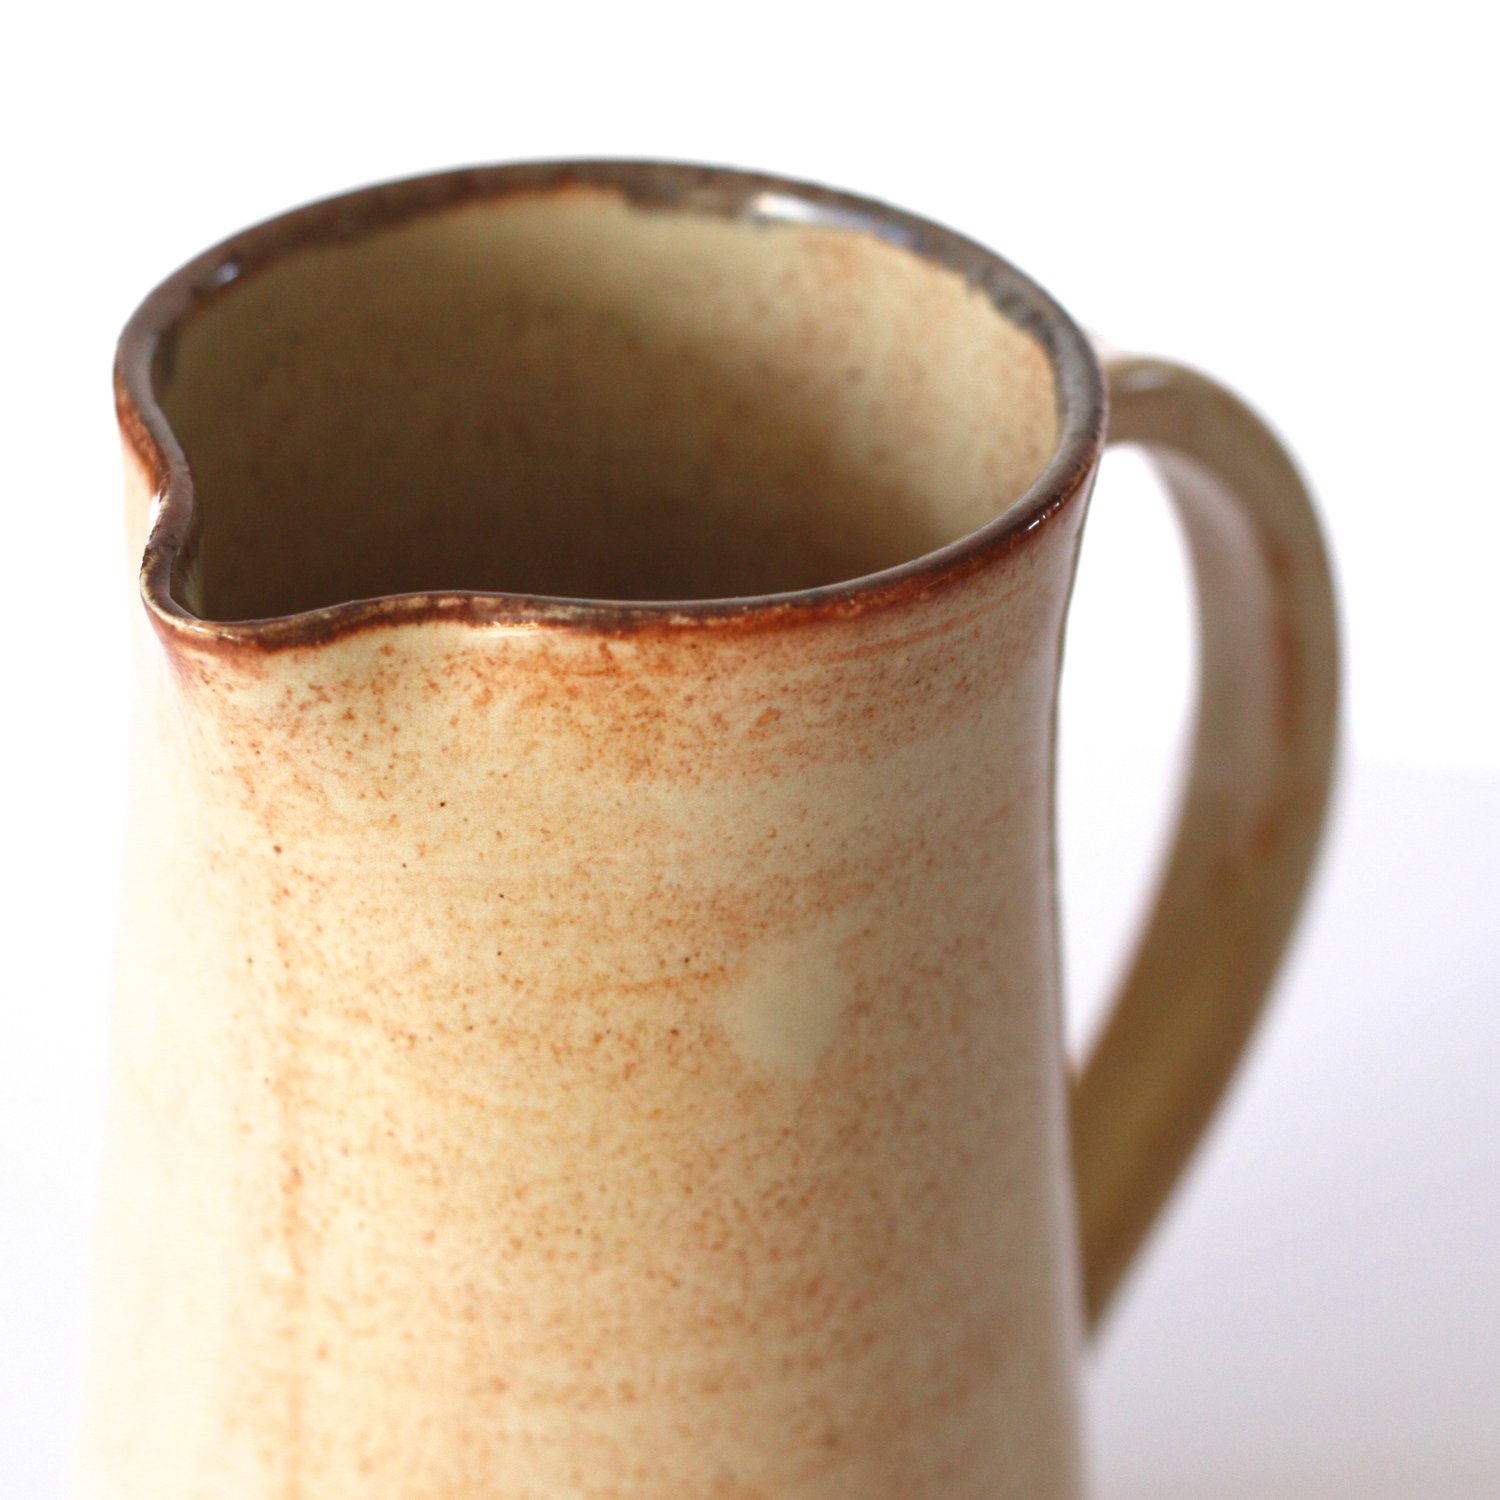 Image of Ceramic Pitcher / Pottery Pitcher / Doubles as a Vase / Shino Vase / 7 inch Pitcher